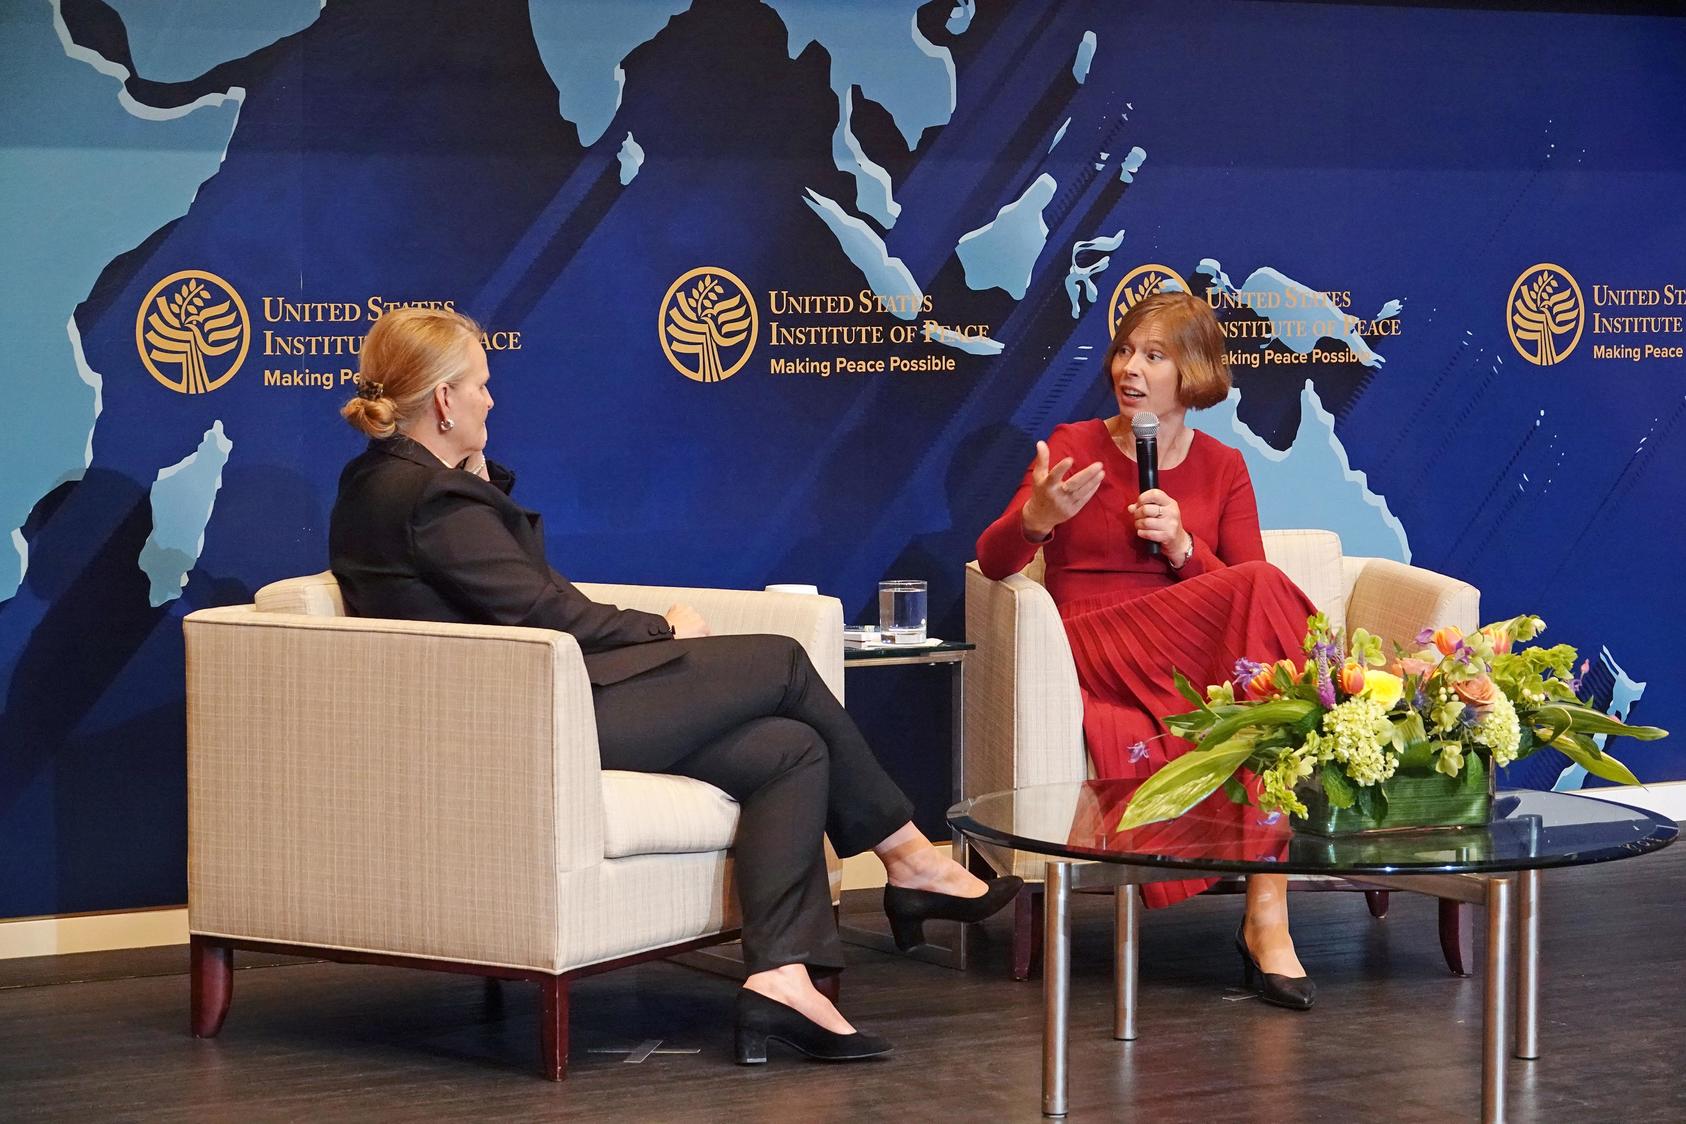 Kersti Kaljulaid, a former president of Estonia, and President of USIP Lise Grande sit facing each other on stage.